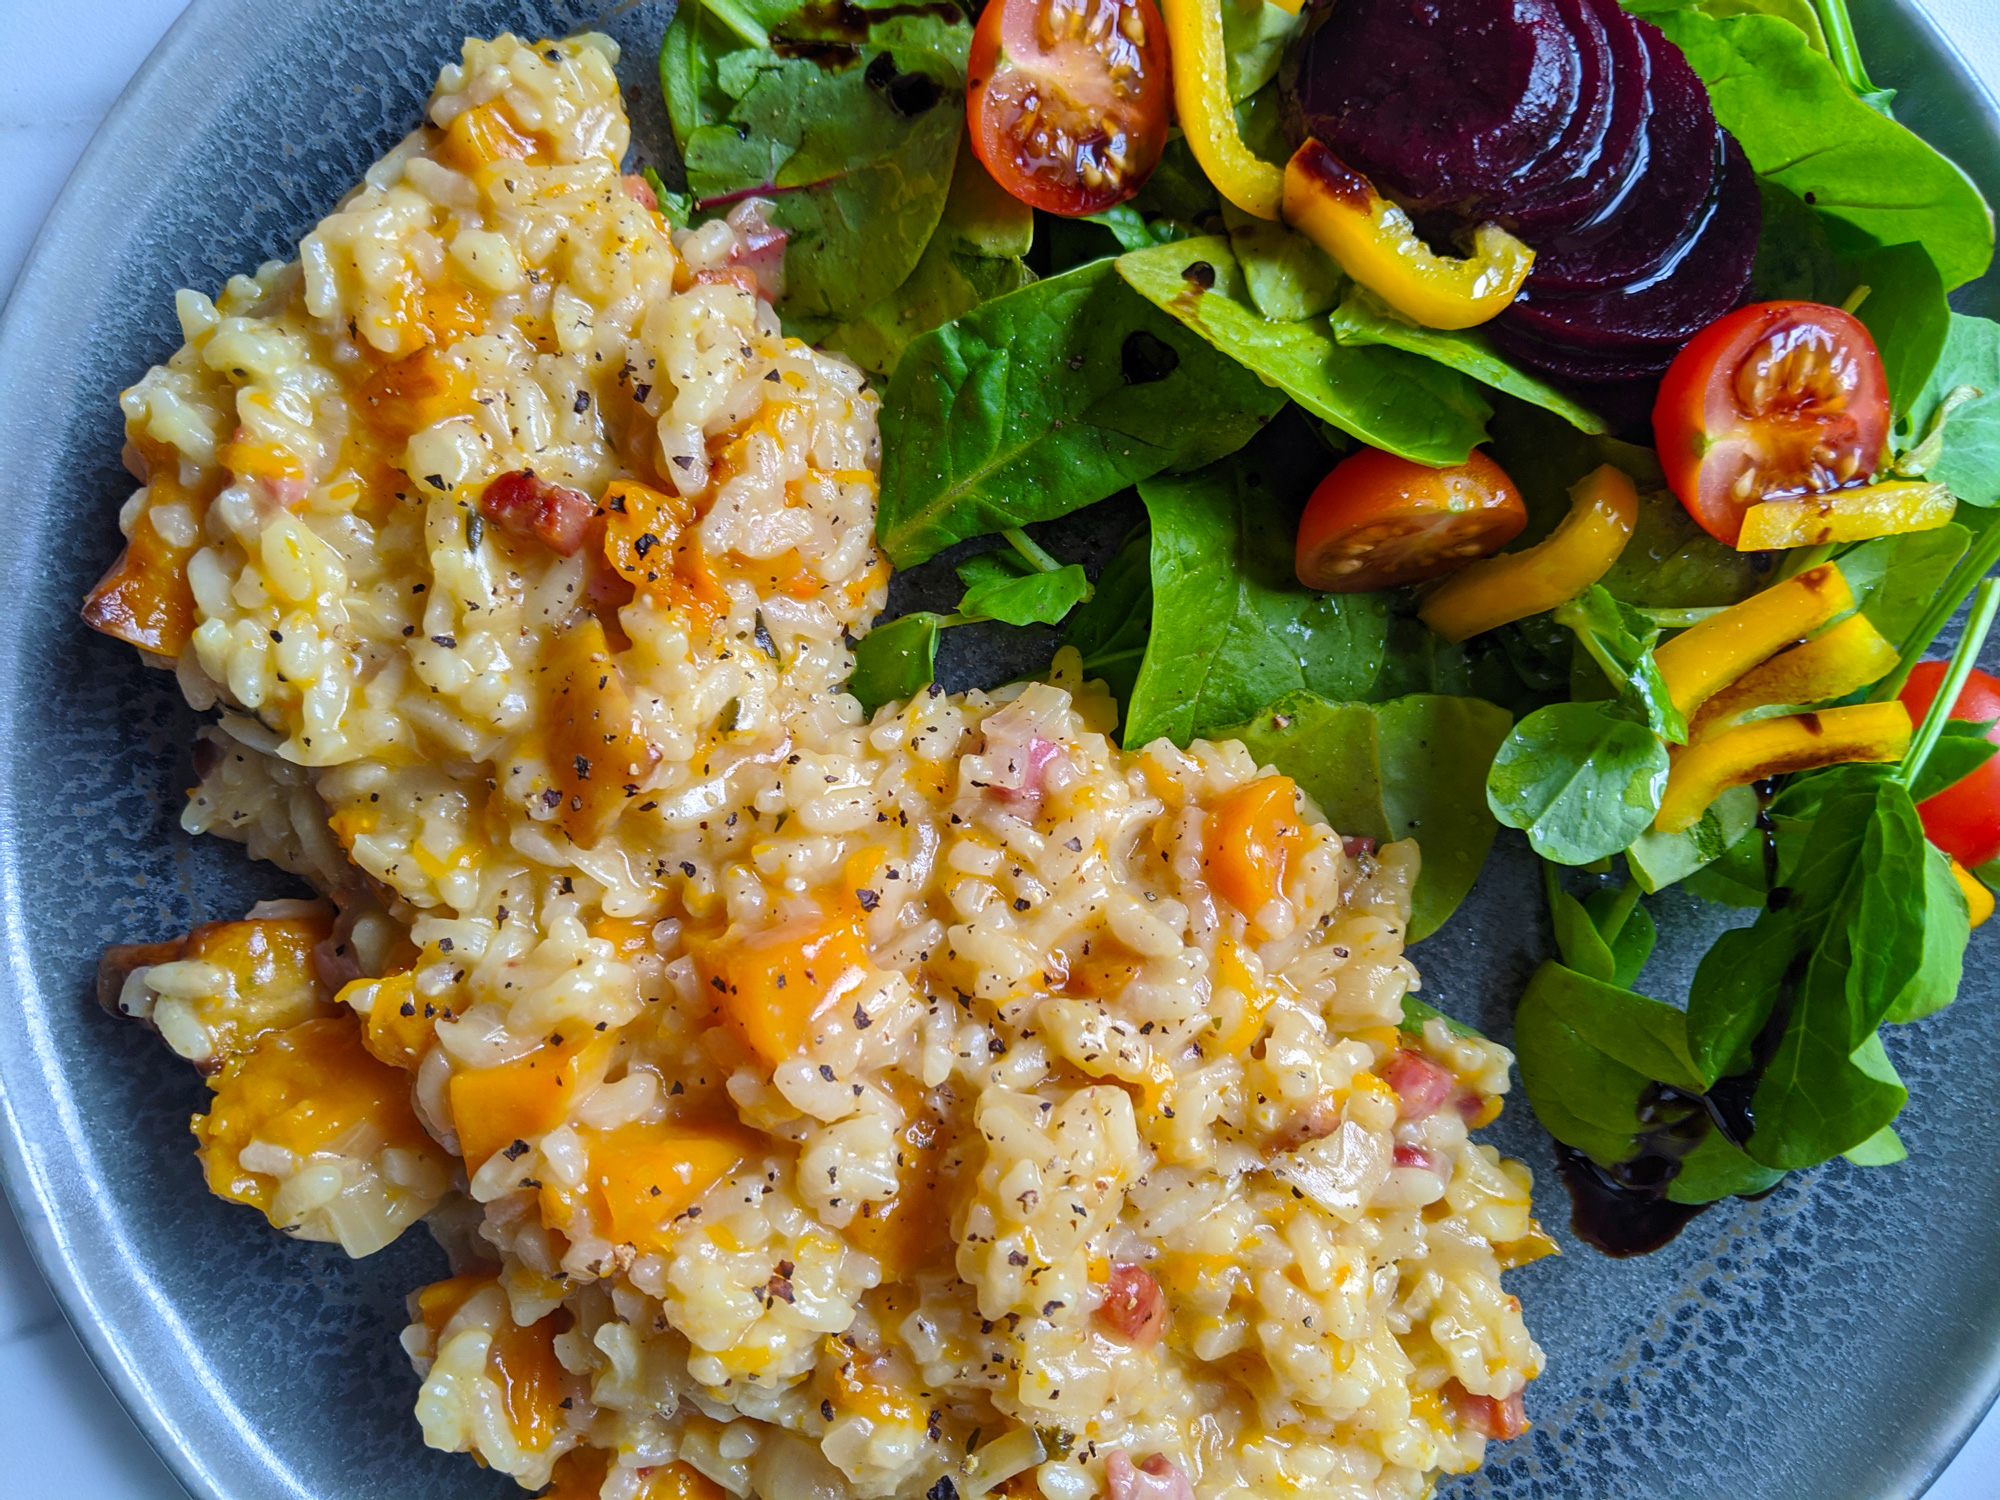 https://www.mygfguide.com/wp-content/uploads/2017/06/butternut-squash-and-pancetta-risotto-web.jpg